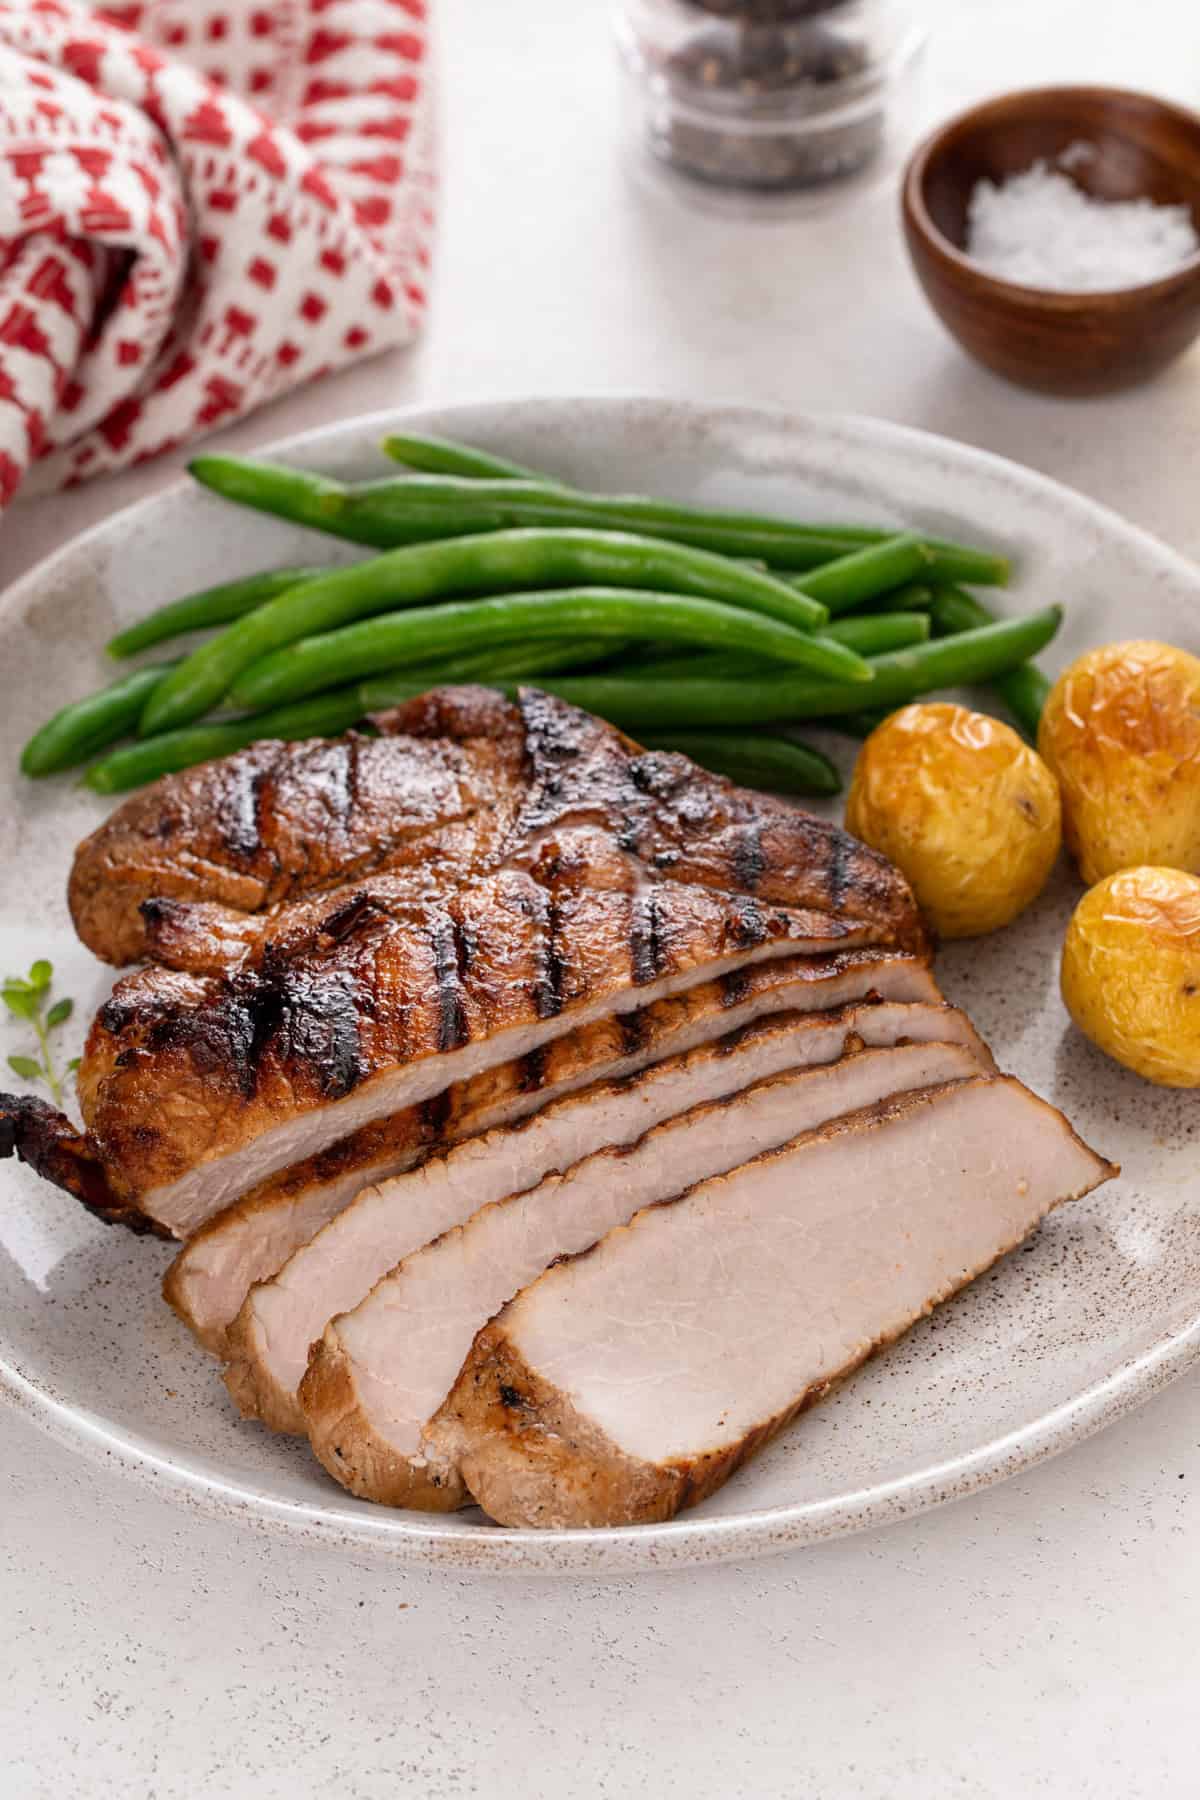 Sliced grilled pork chop on a plate next to roasted potatoes and green beans.